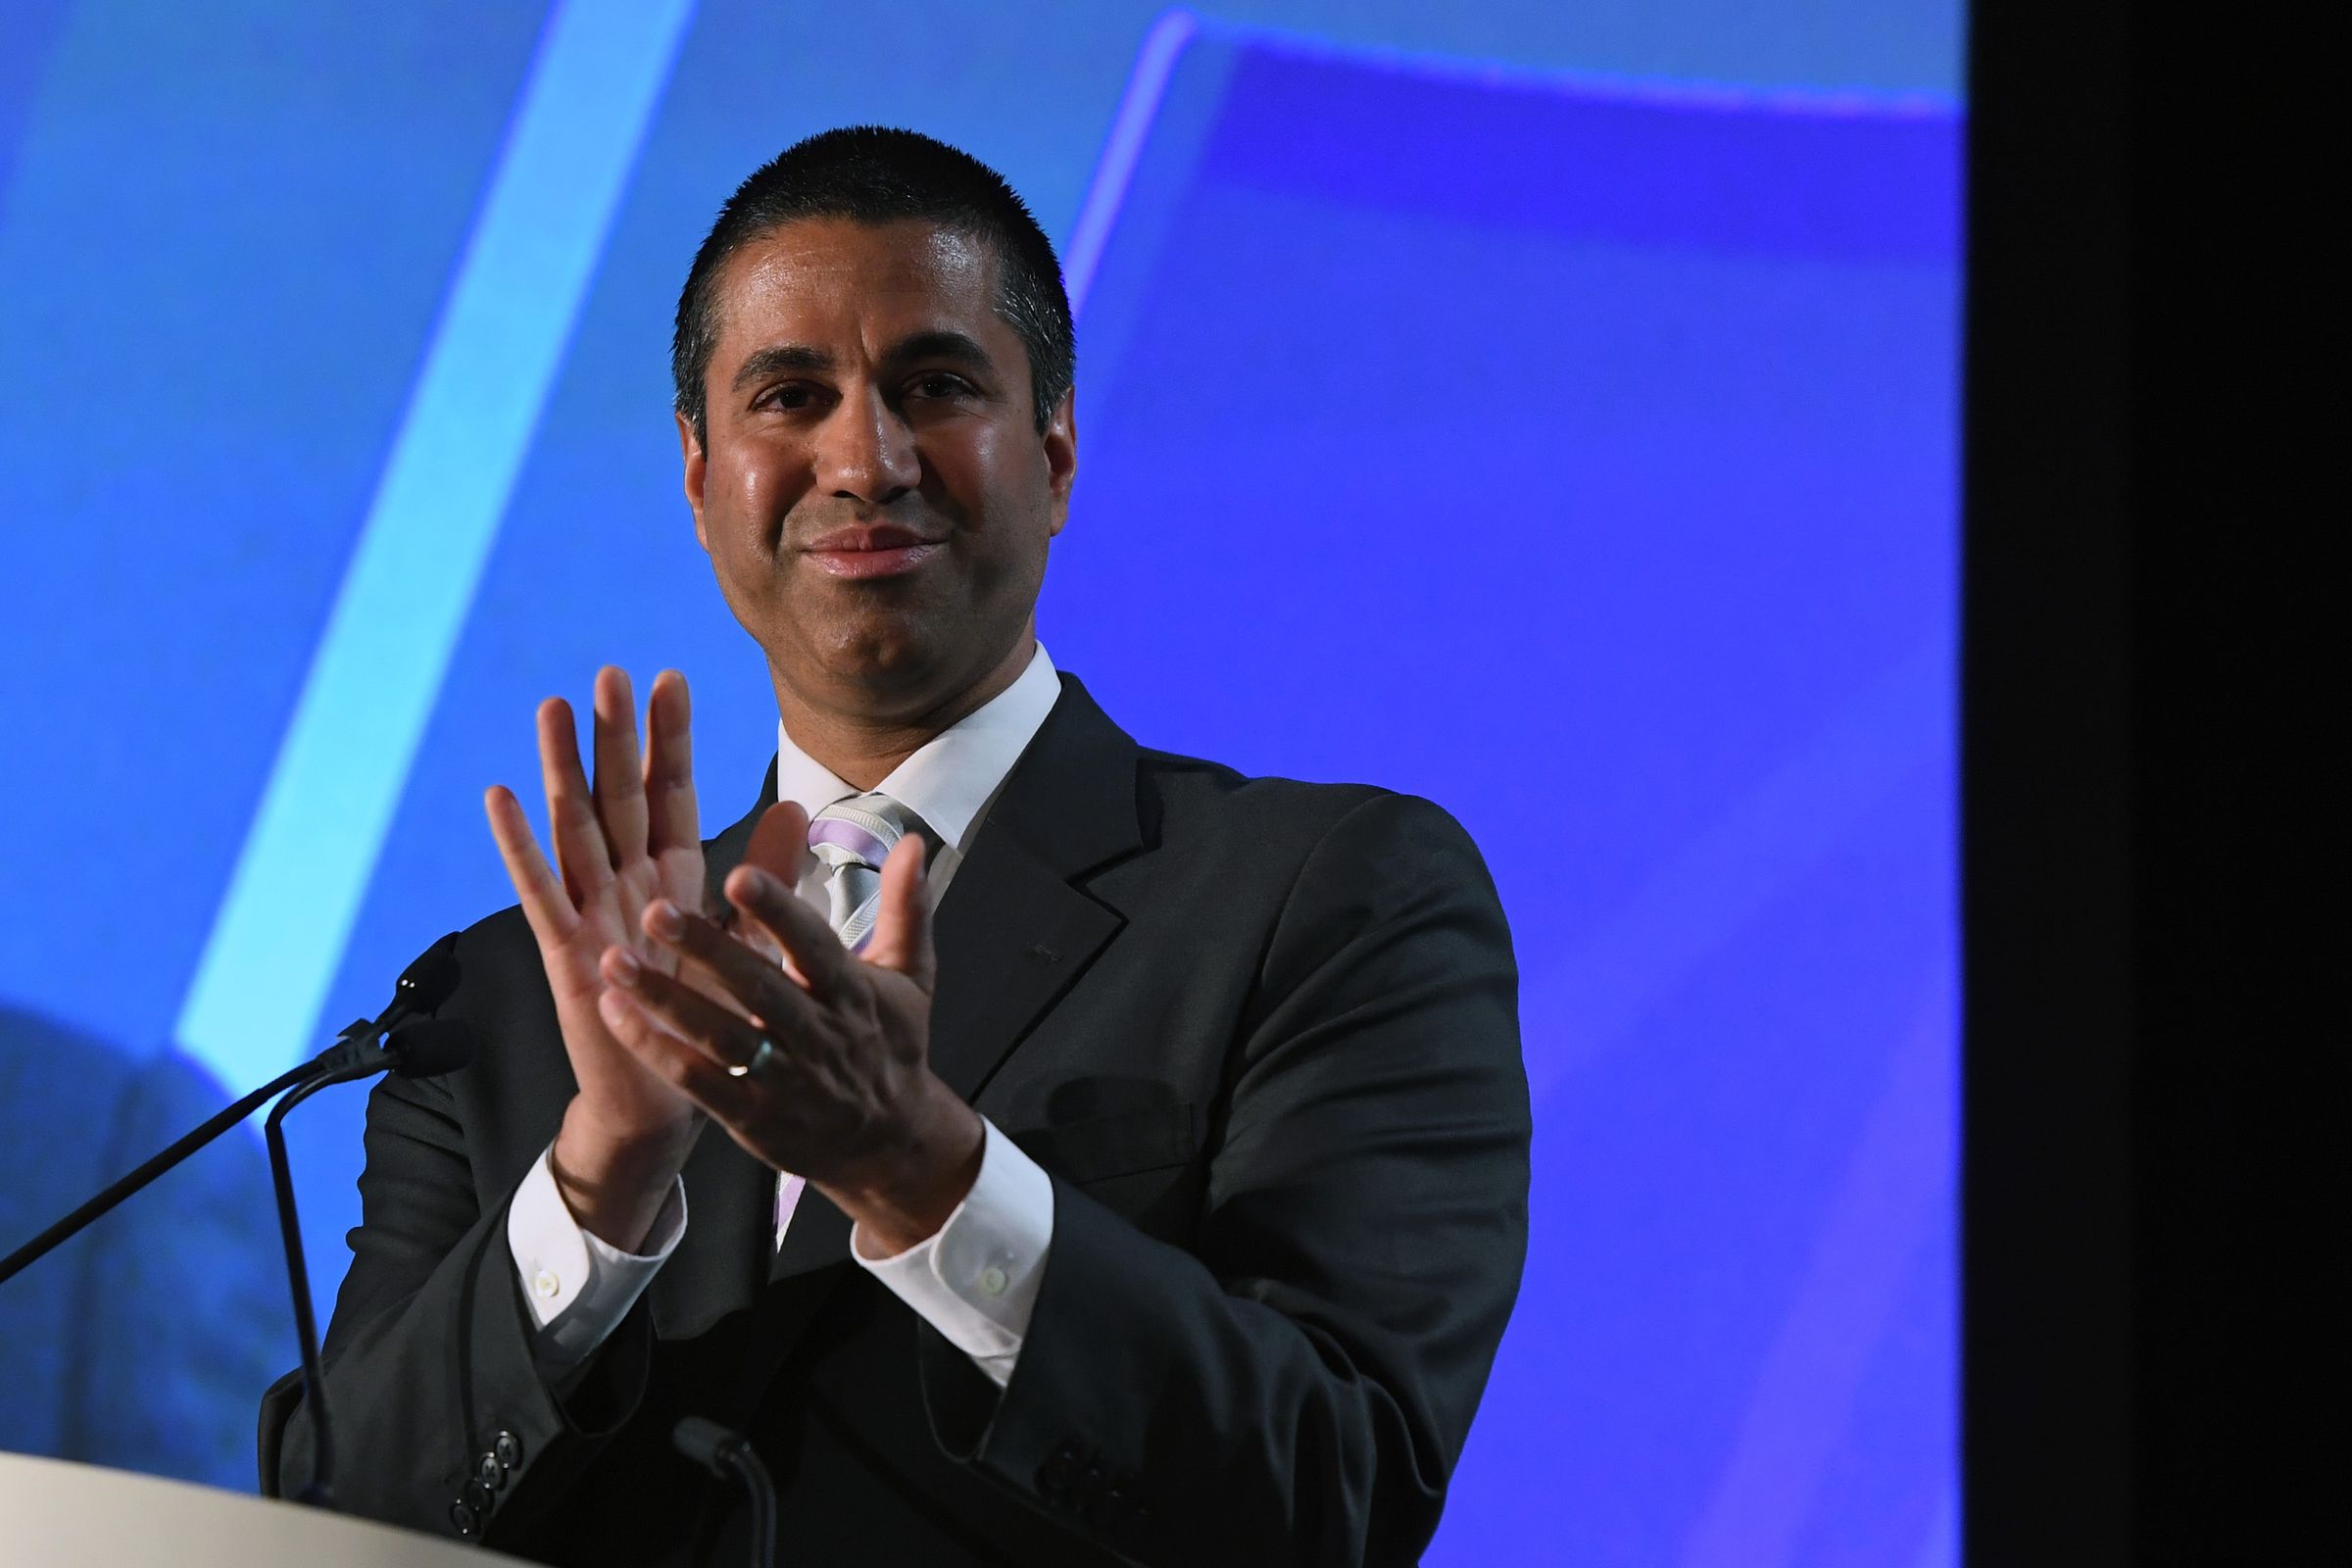 Federal Communications Commission Chairman Ajit Pai Addresses 2017 NAB Show In Las Vegas